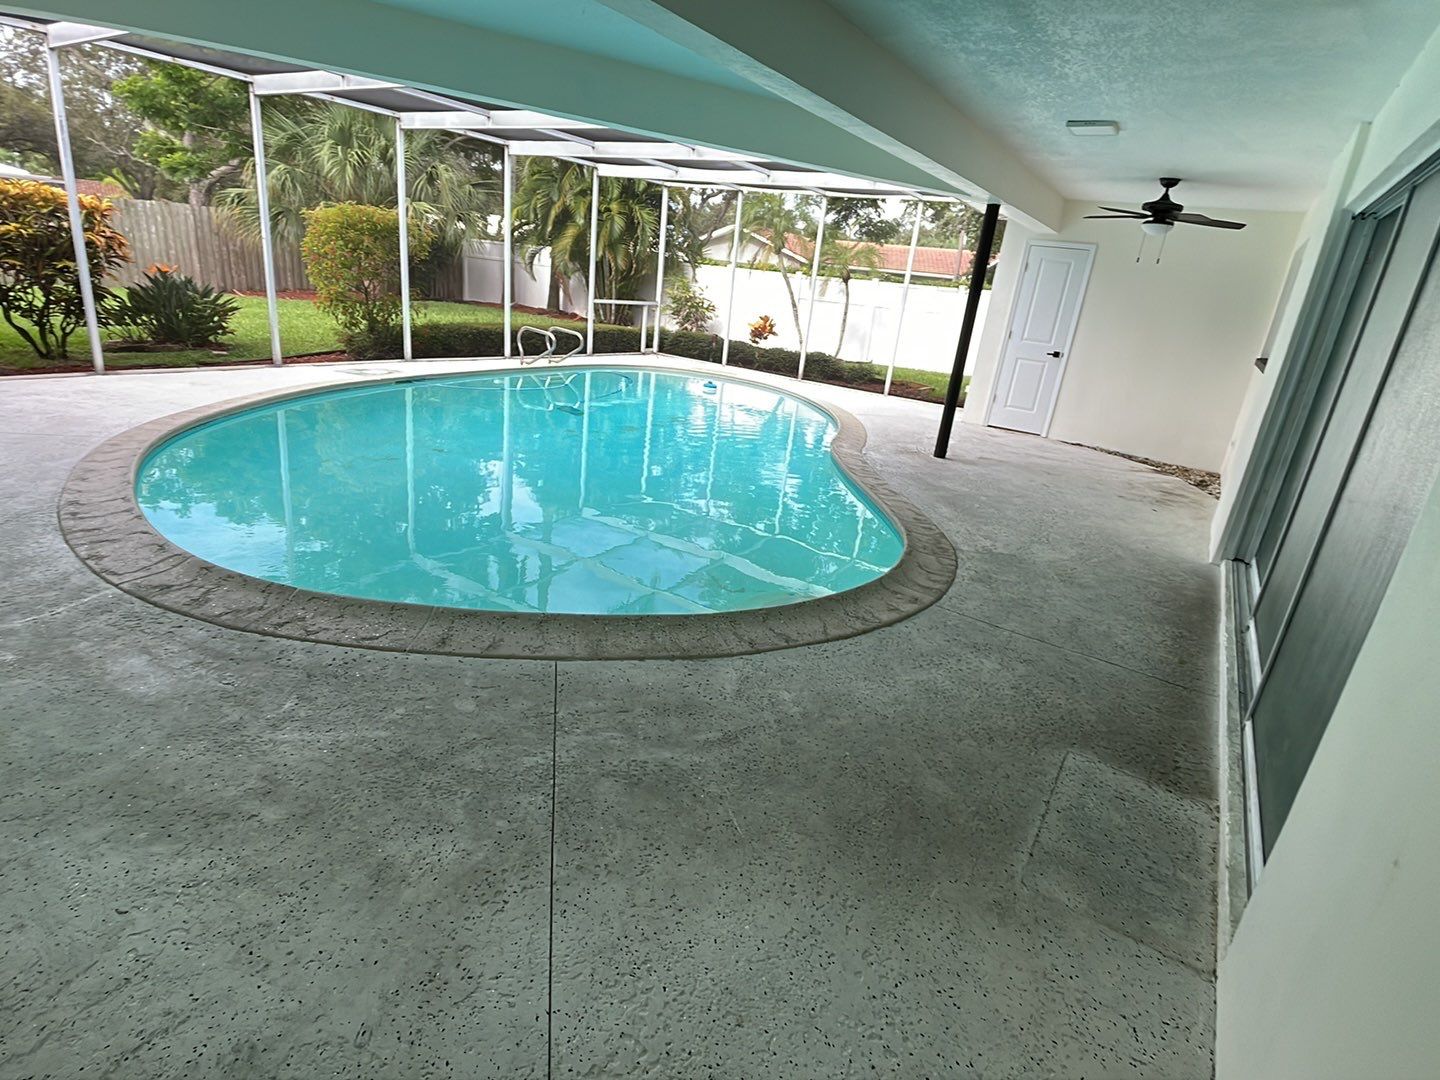 Bare concrete pool deck with stains and pitting